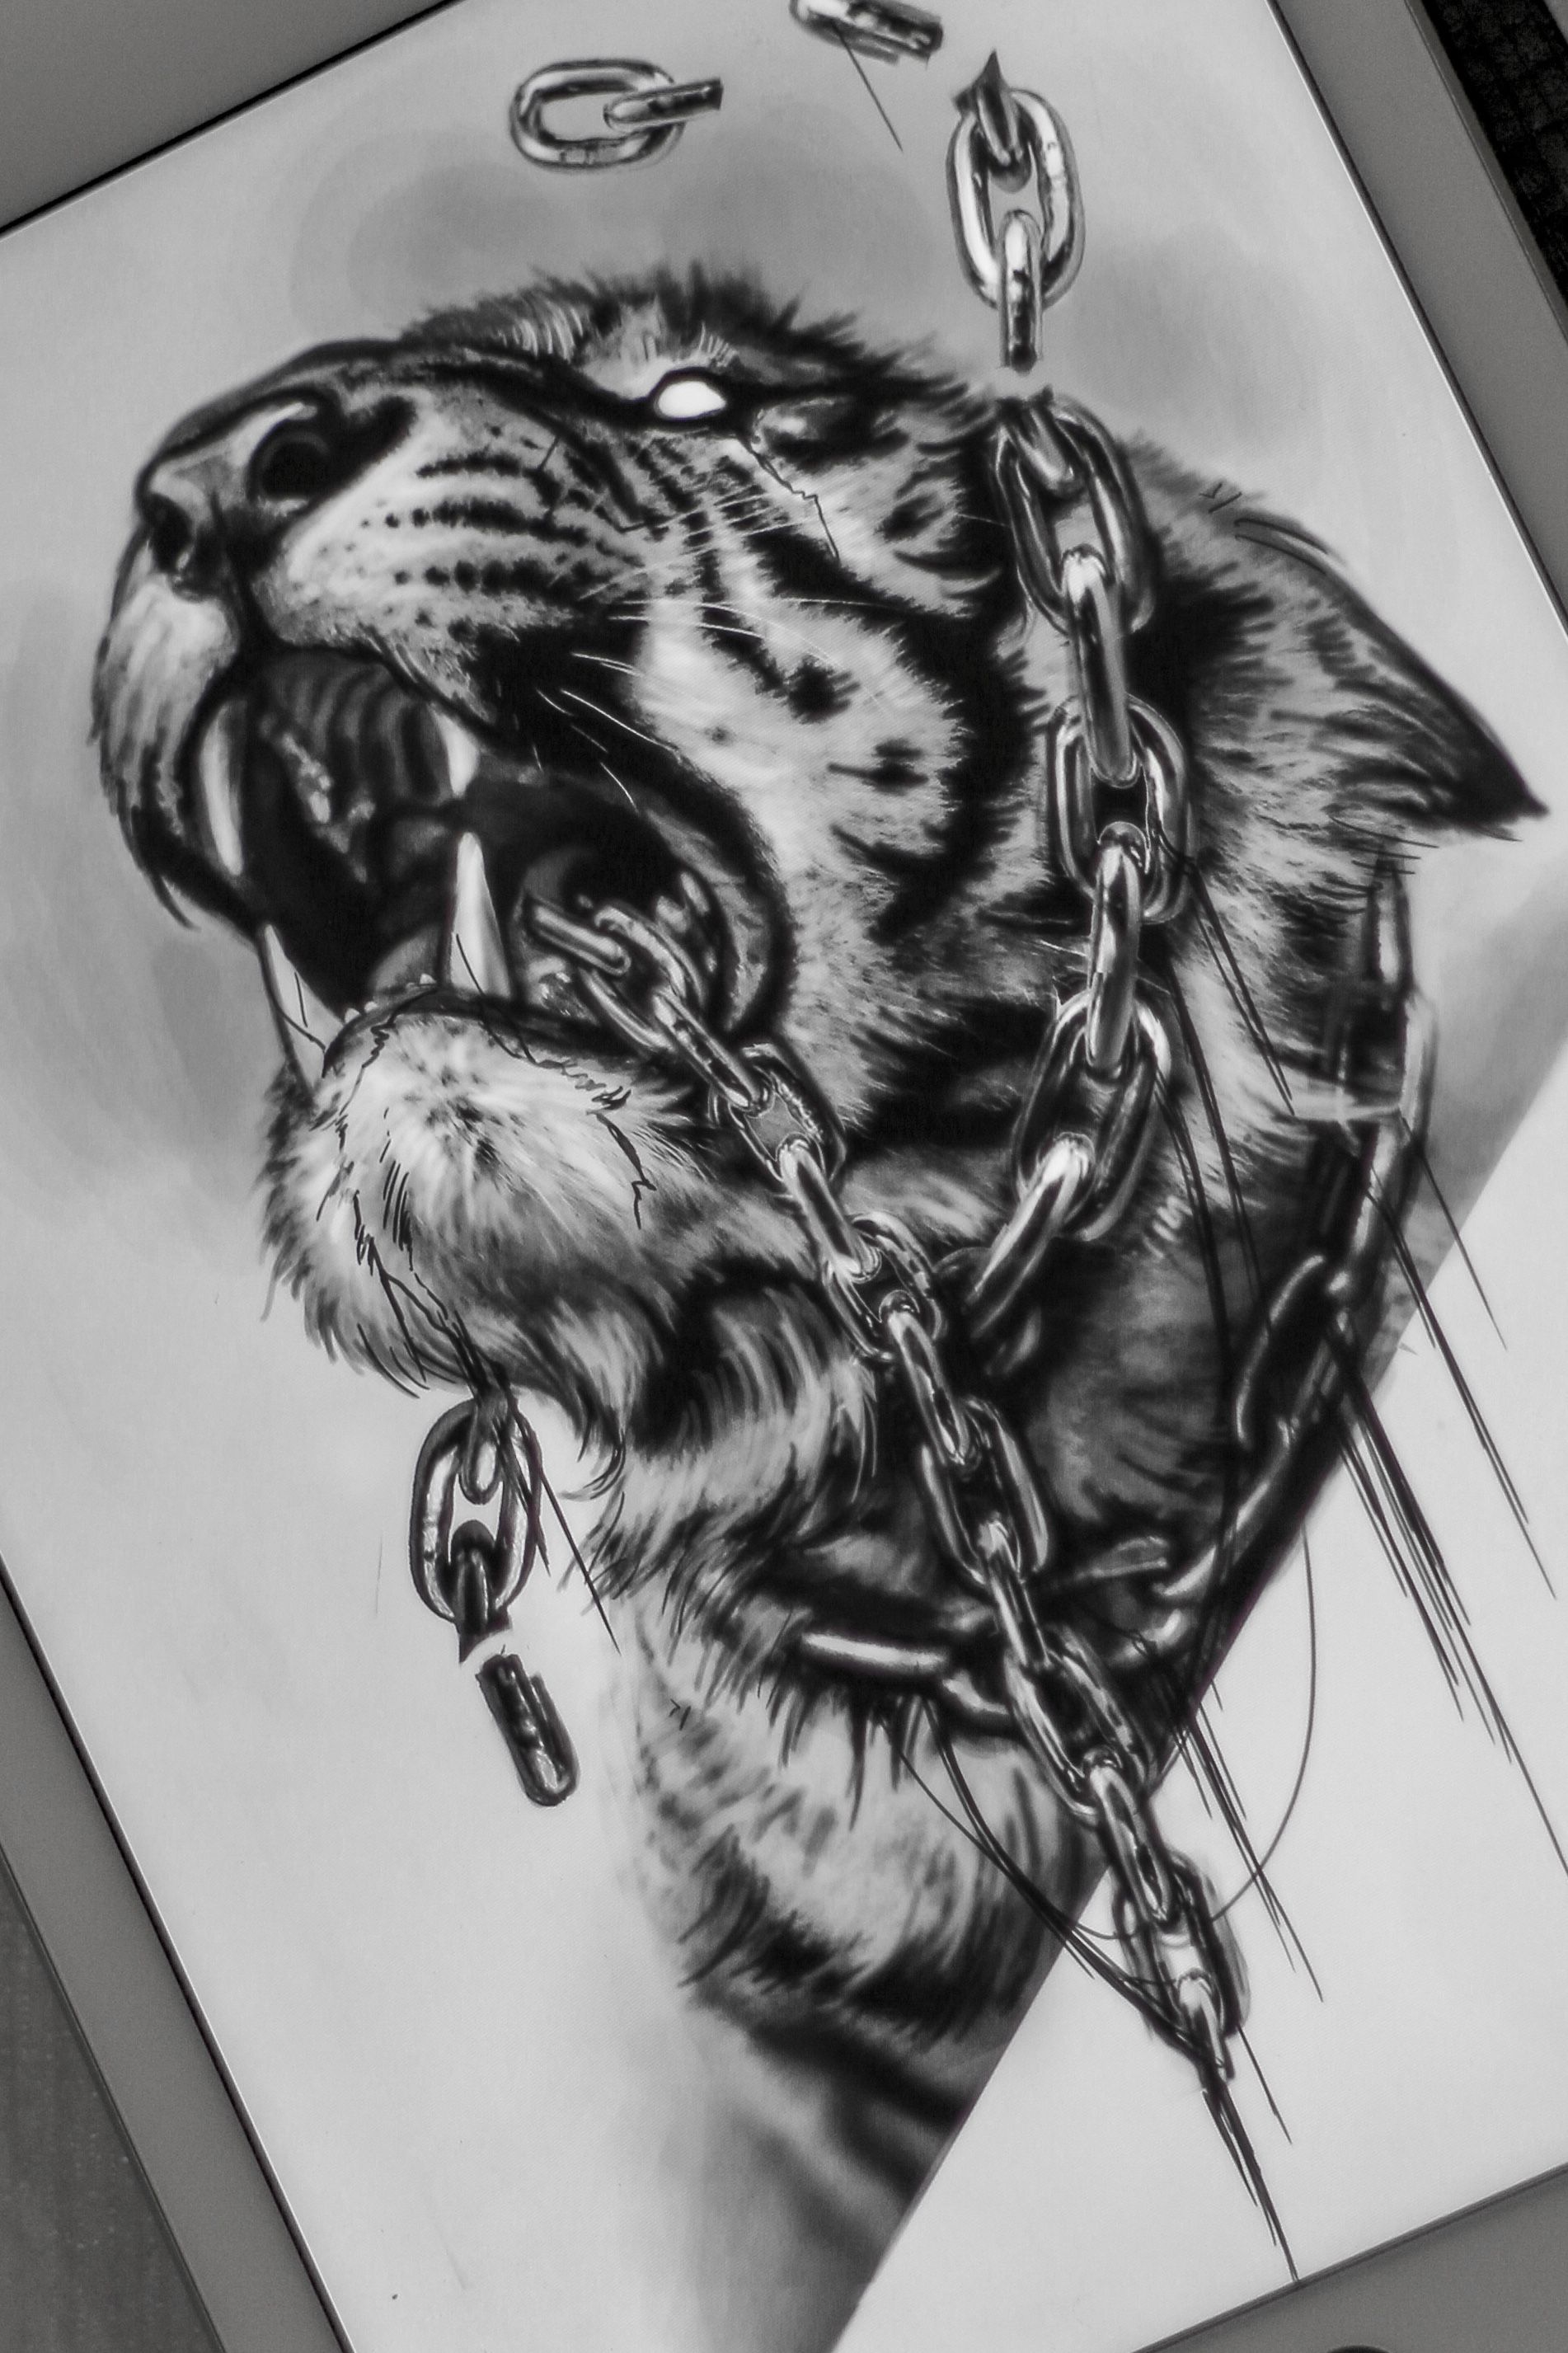 4497 Tribal Tiger Tattoo Images Stock Photos  Vectors  Shutterstock